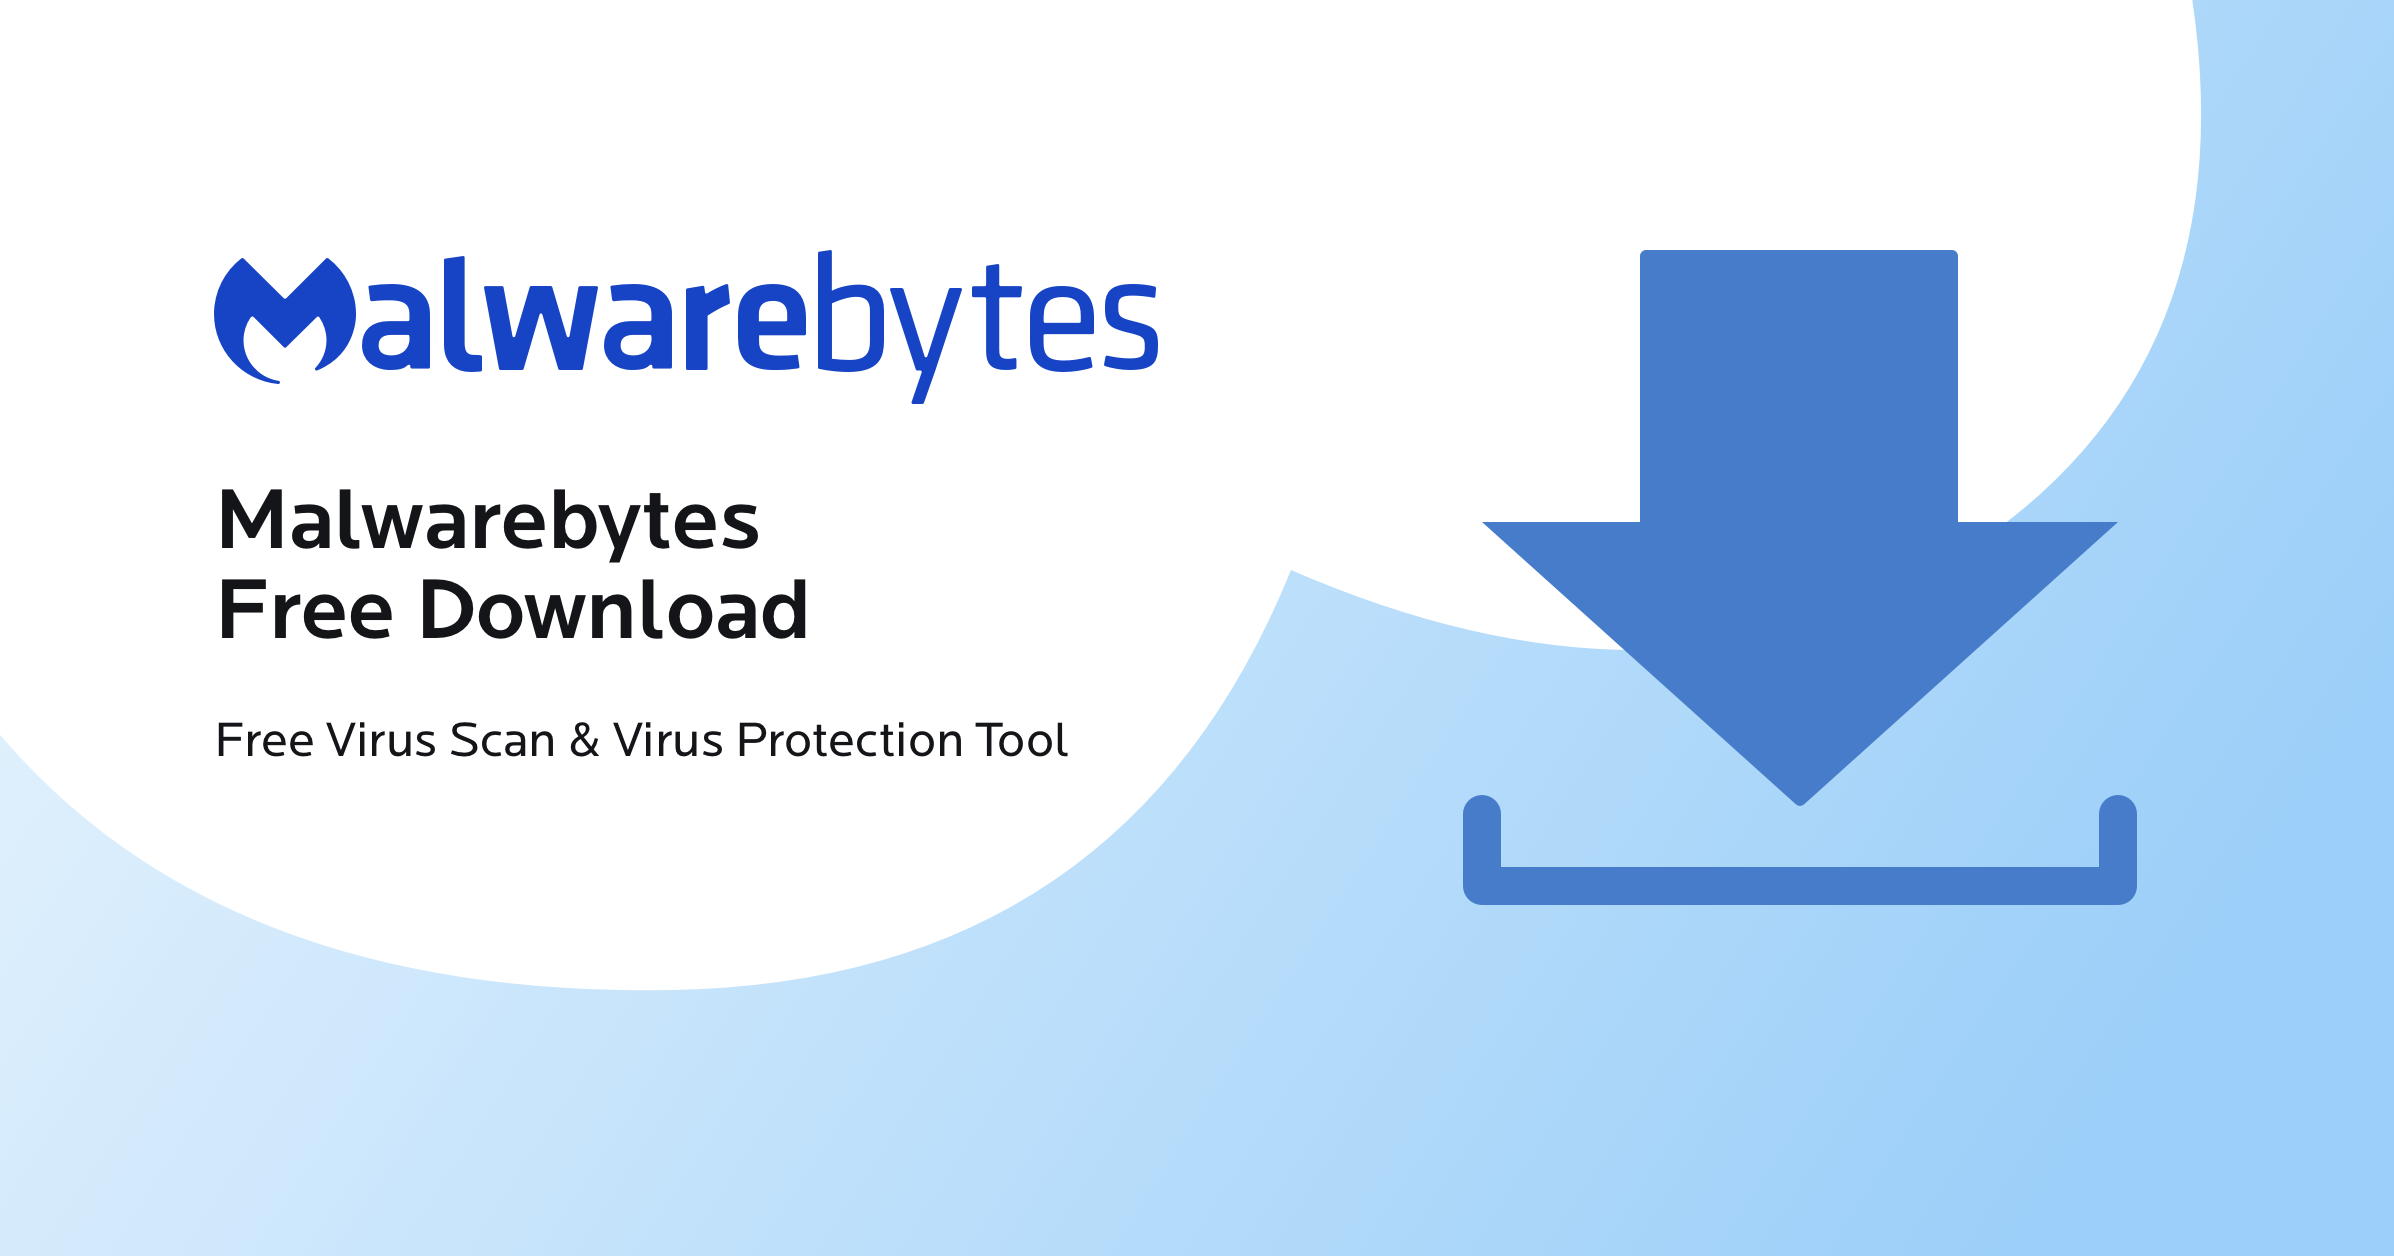 Malwarebytes Anti-Malware: A powerful anti-malware tool that can detect and remove ntkrnlmp.exe-related malware.
Windows Defender: The built-in antivirus program in Windows 10, which can help in identifying and eliminating any malicious files associated with ntkrnlmp.exe.